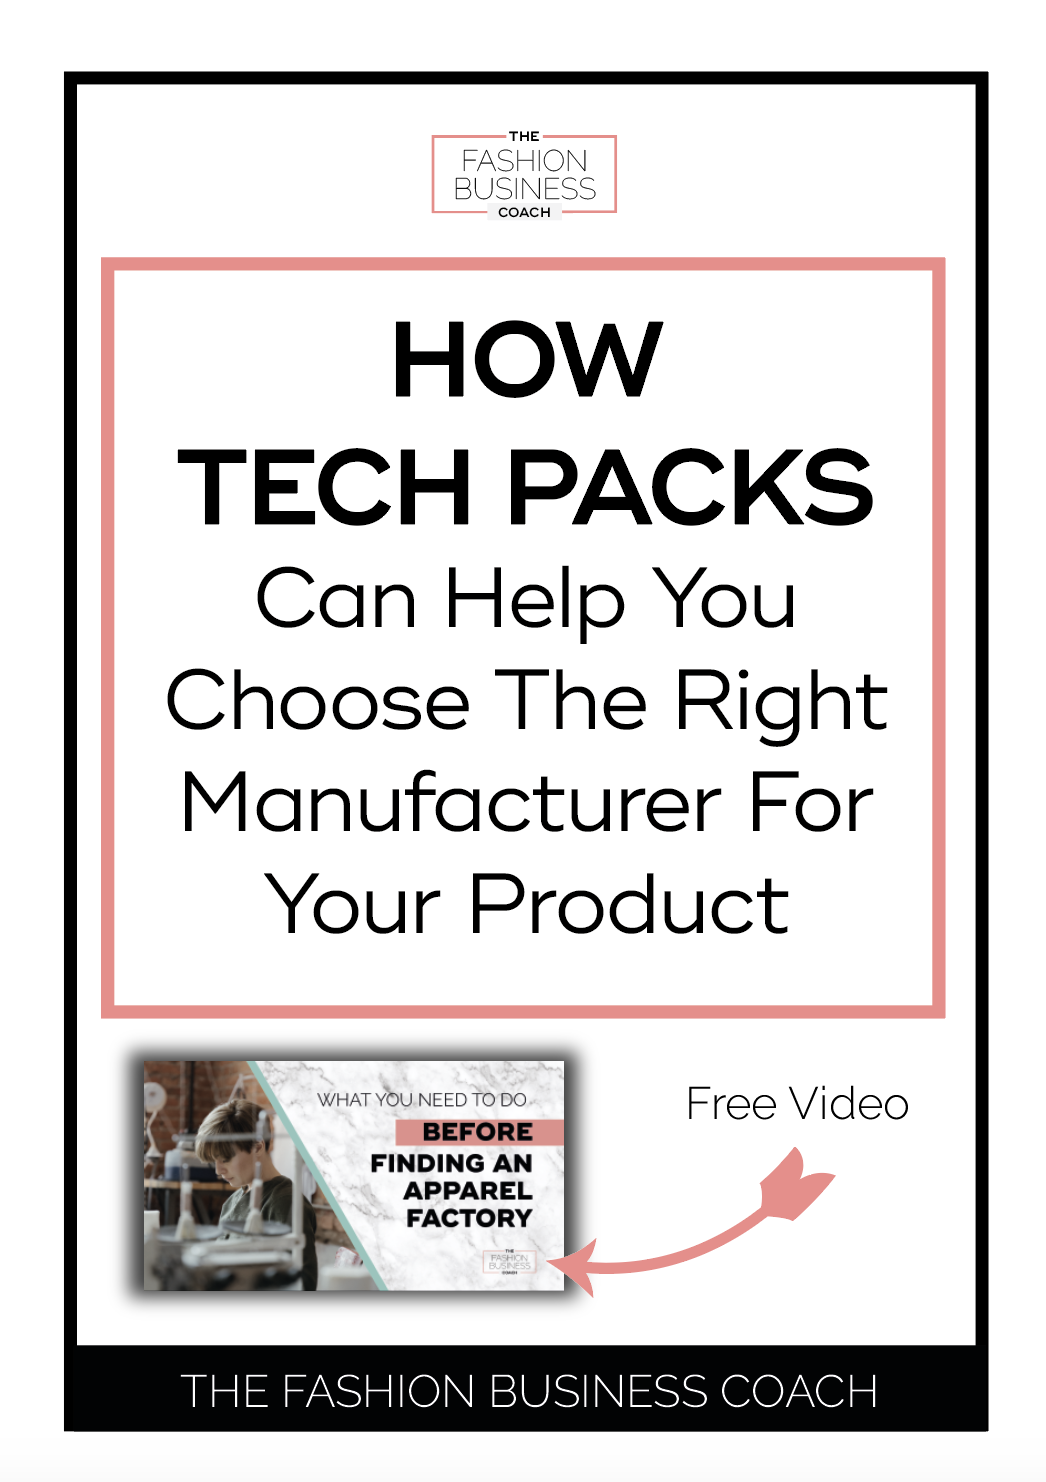 How Tech Packs Can Help You Choose The Right Manufacturer For Your Product 4.png